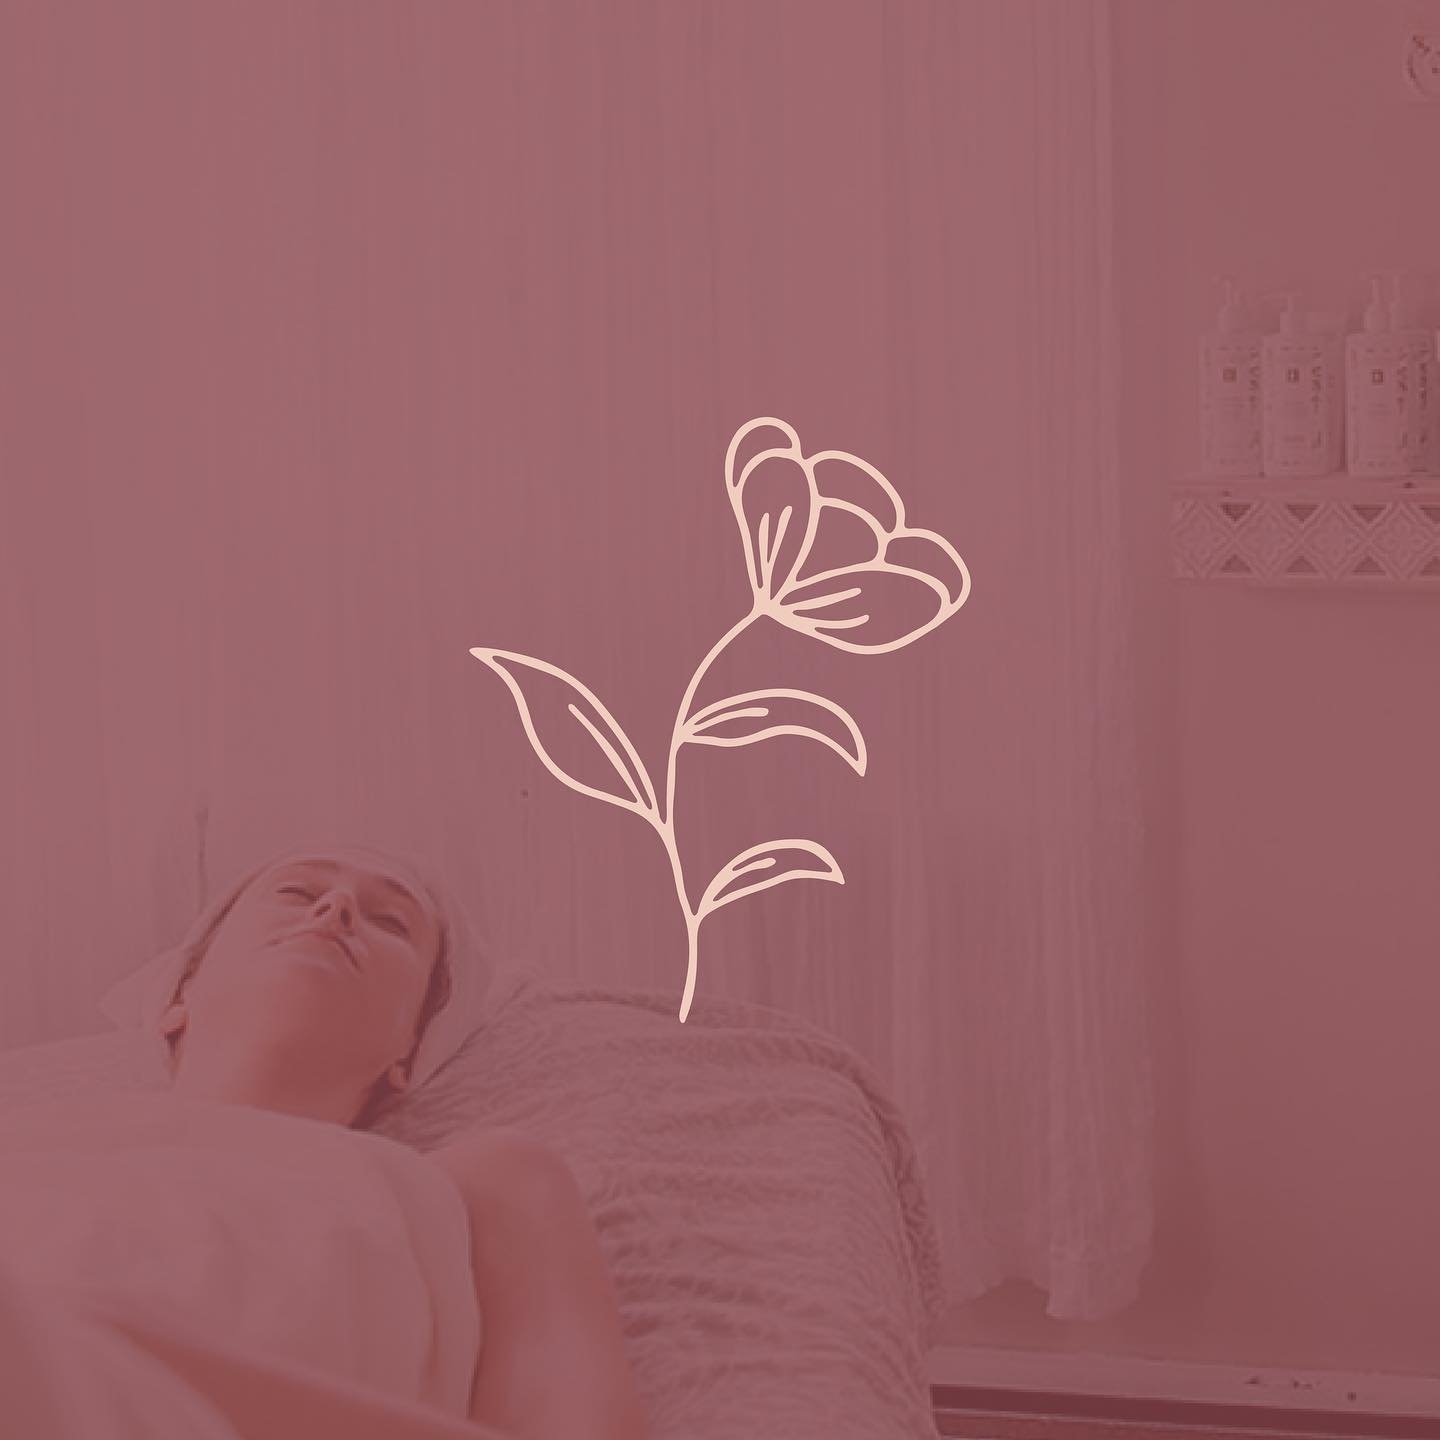 ✨ Brand Reveal for Blossom Spa Retreat ✨

I&rsquo;m so happy to share this beautiful brand collaboration with @blossomspa.retreat! After 3+ years in business, Andrea came to me ready to streamline her marketing and bring more clarity to Blossom&rsquo